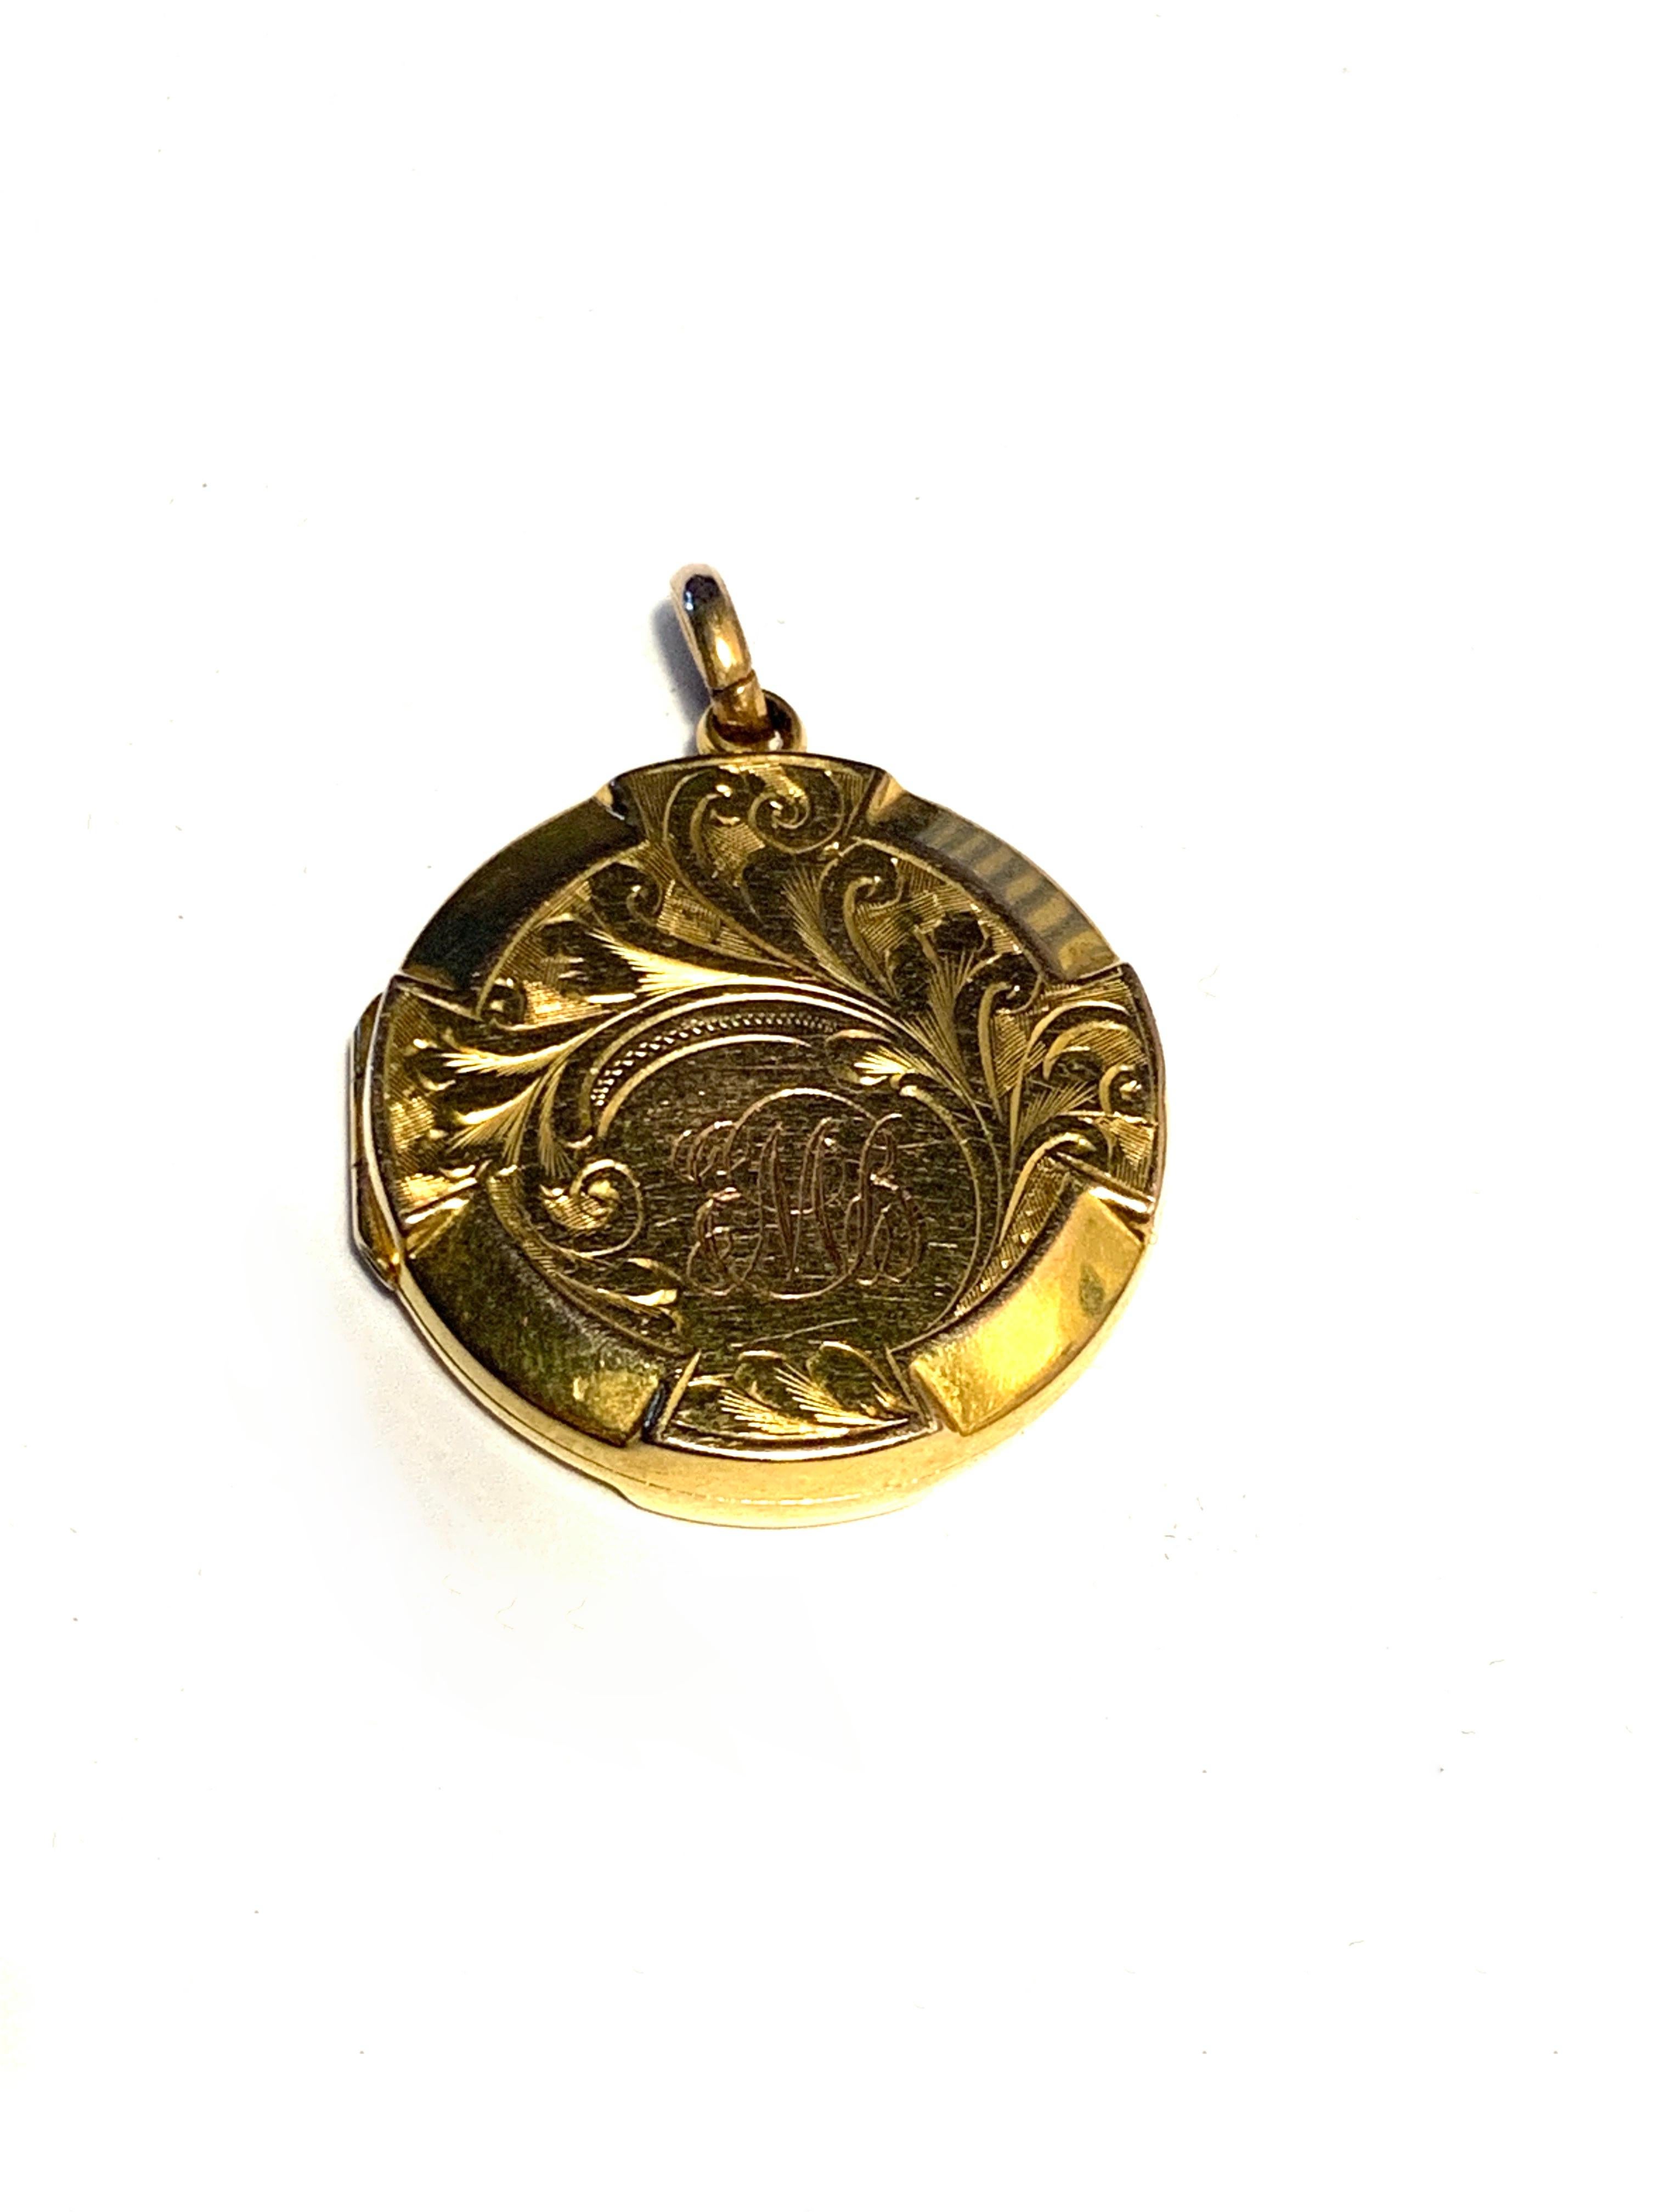 Rare 9ct 375 Gold Antique Locket
with hand engraved decorative foliage
The main car-touche is engraved 